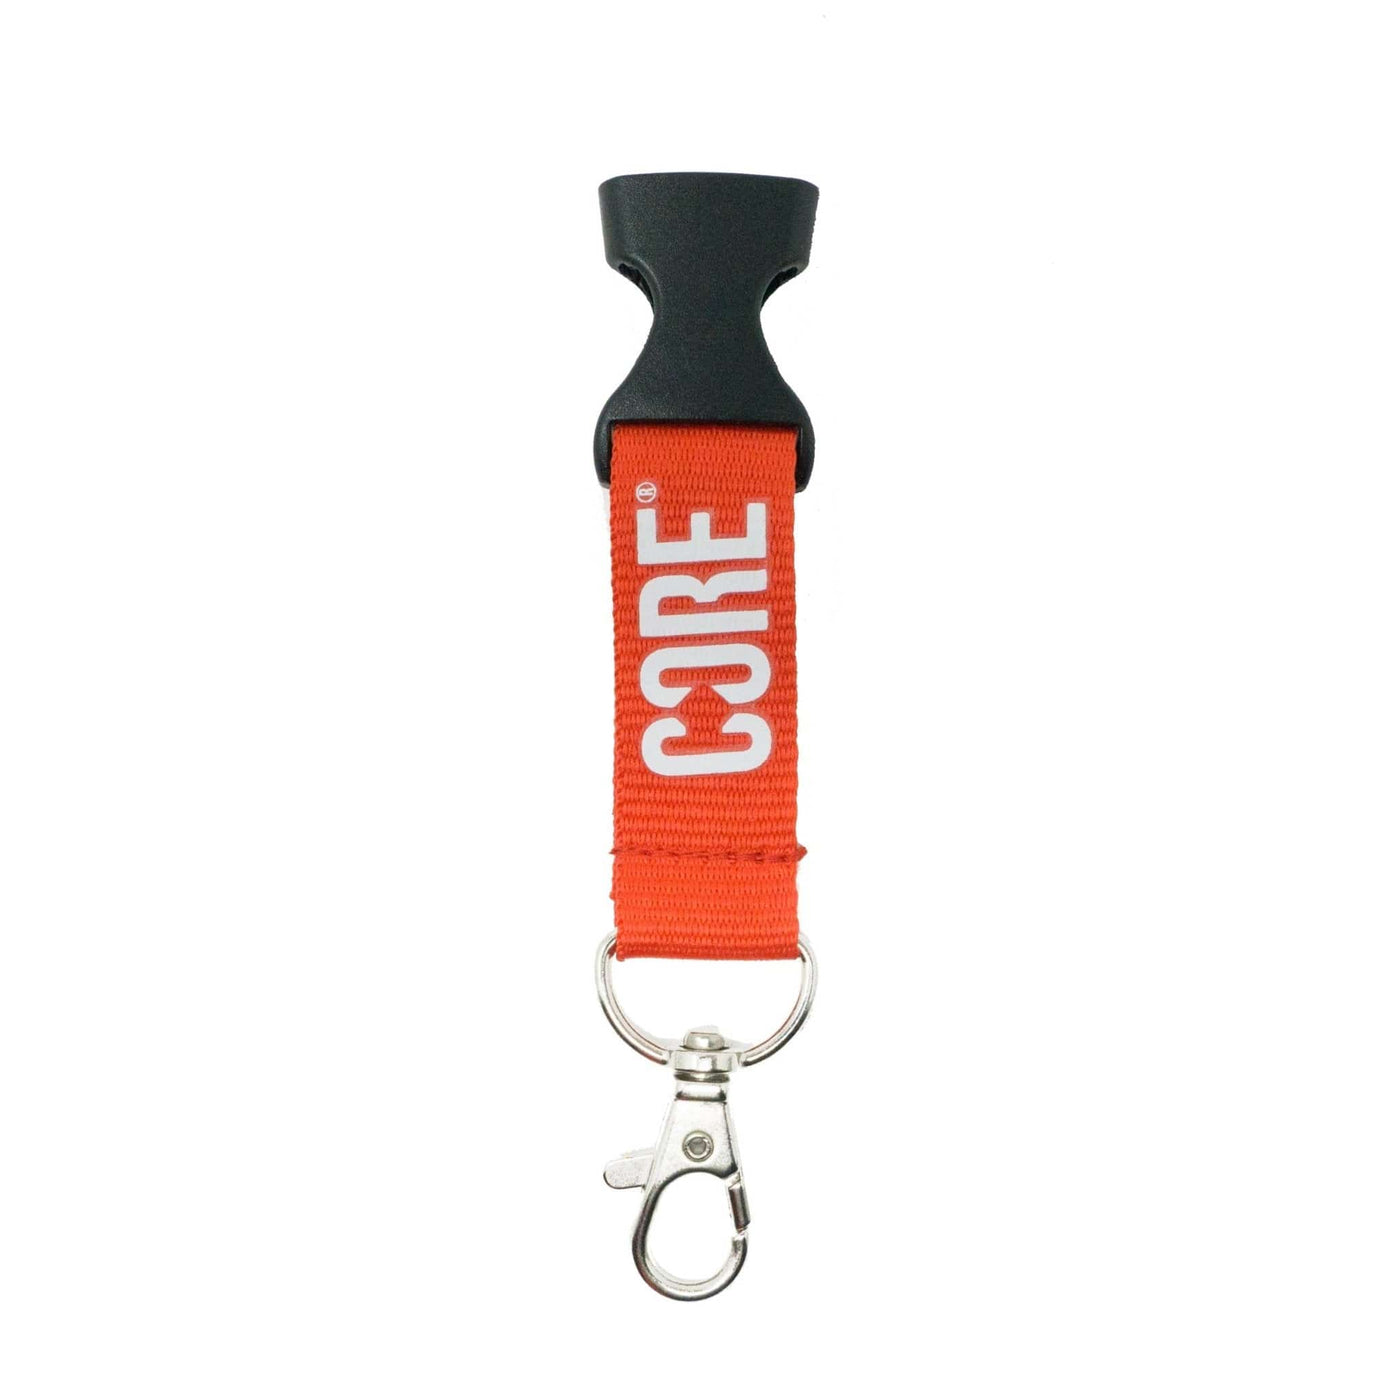 CORE Lanyard Keychain - Red/White - CORE Protection